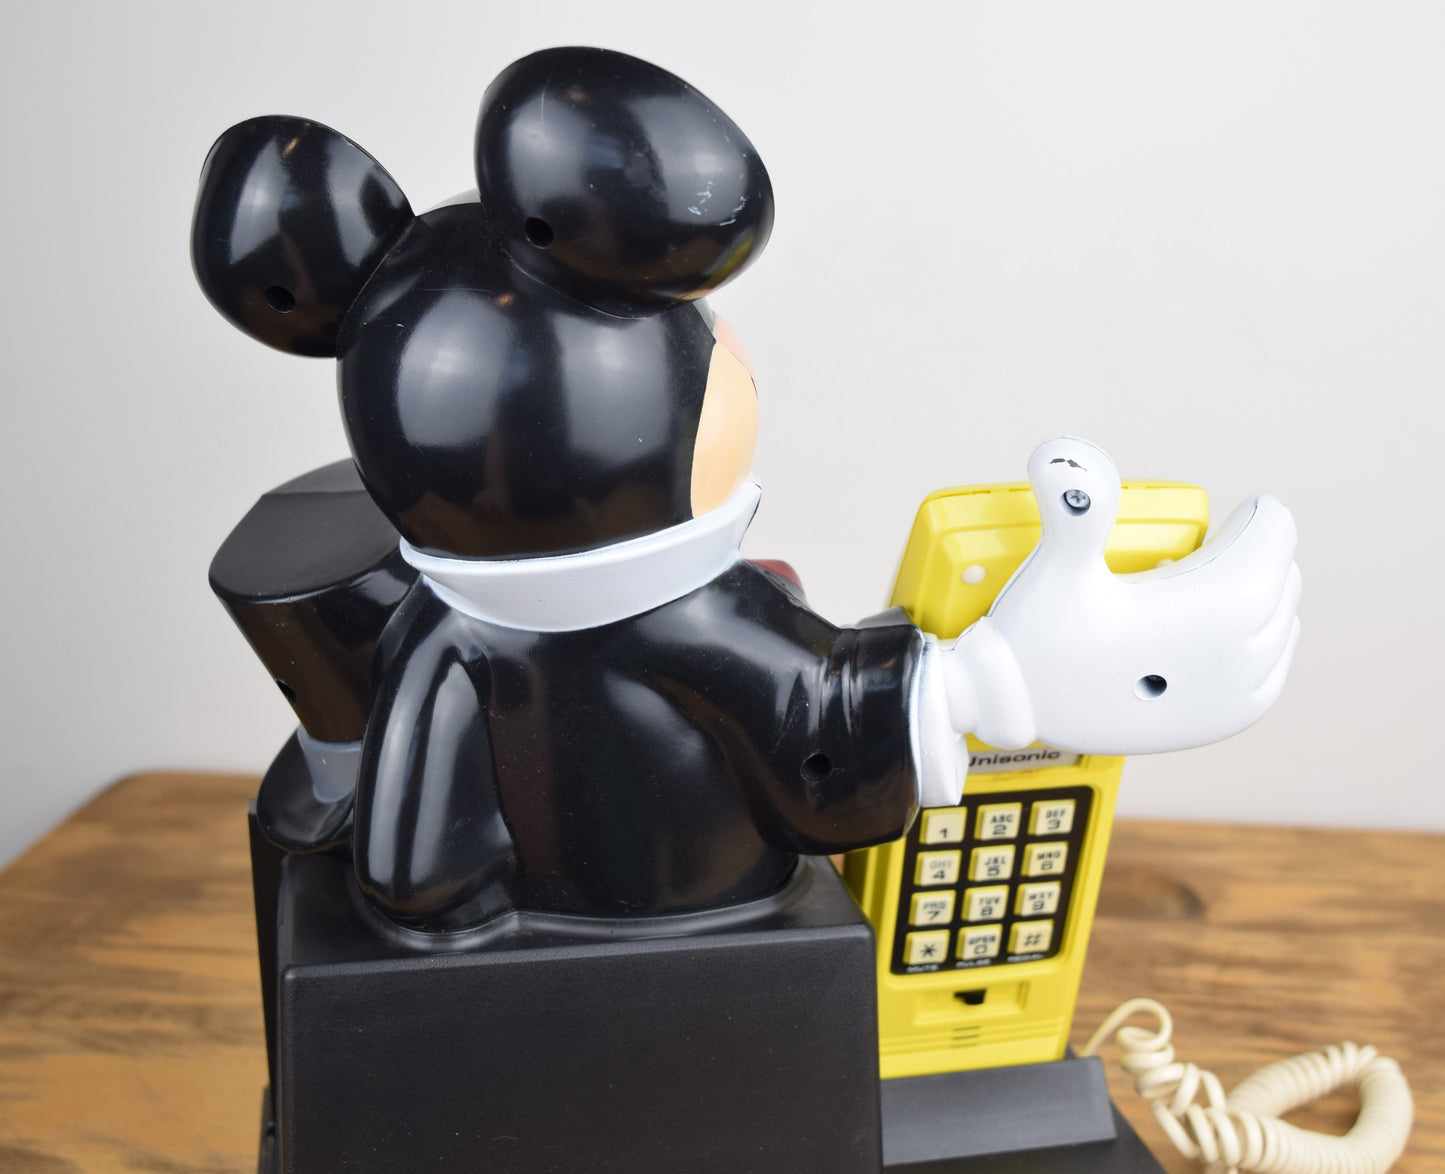 Mickey Mouse Magician Telephone